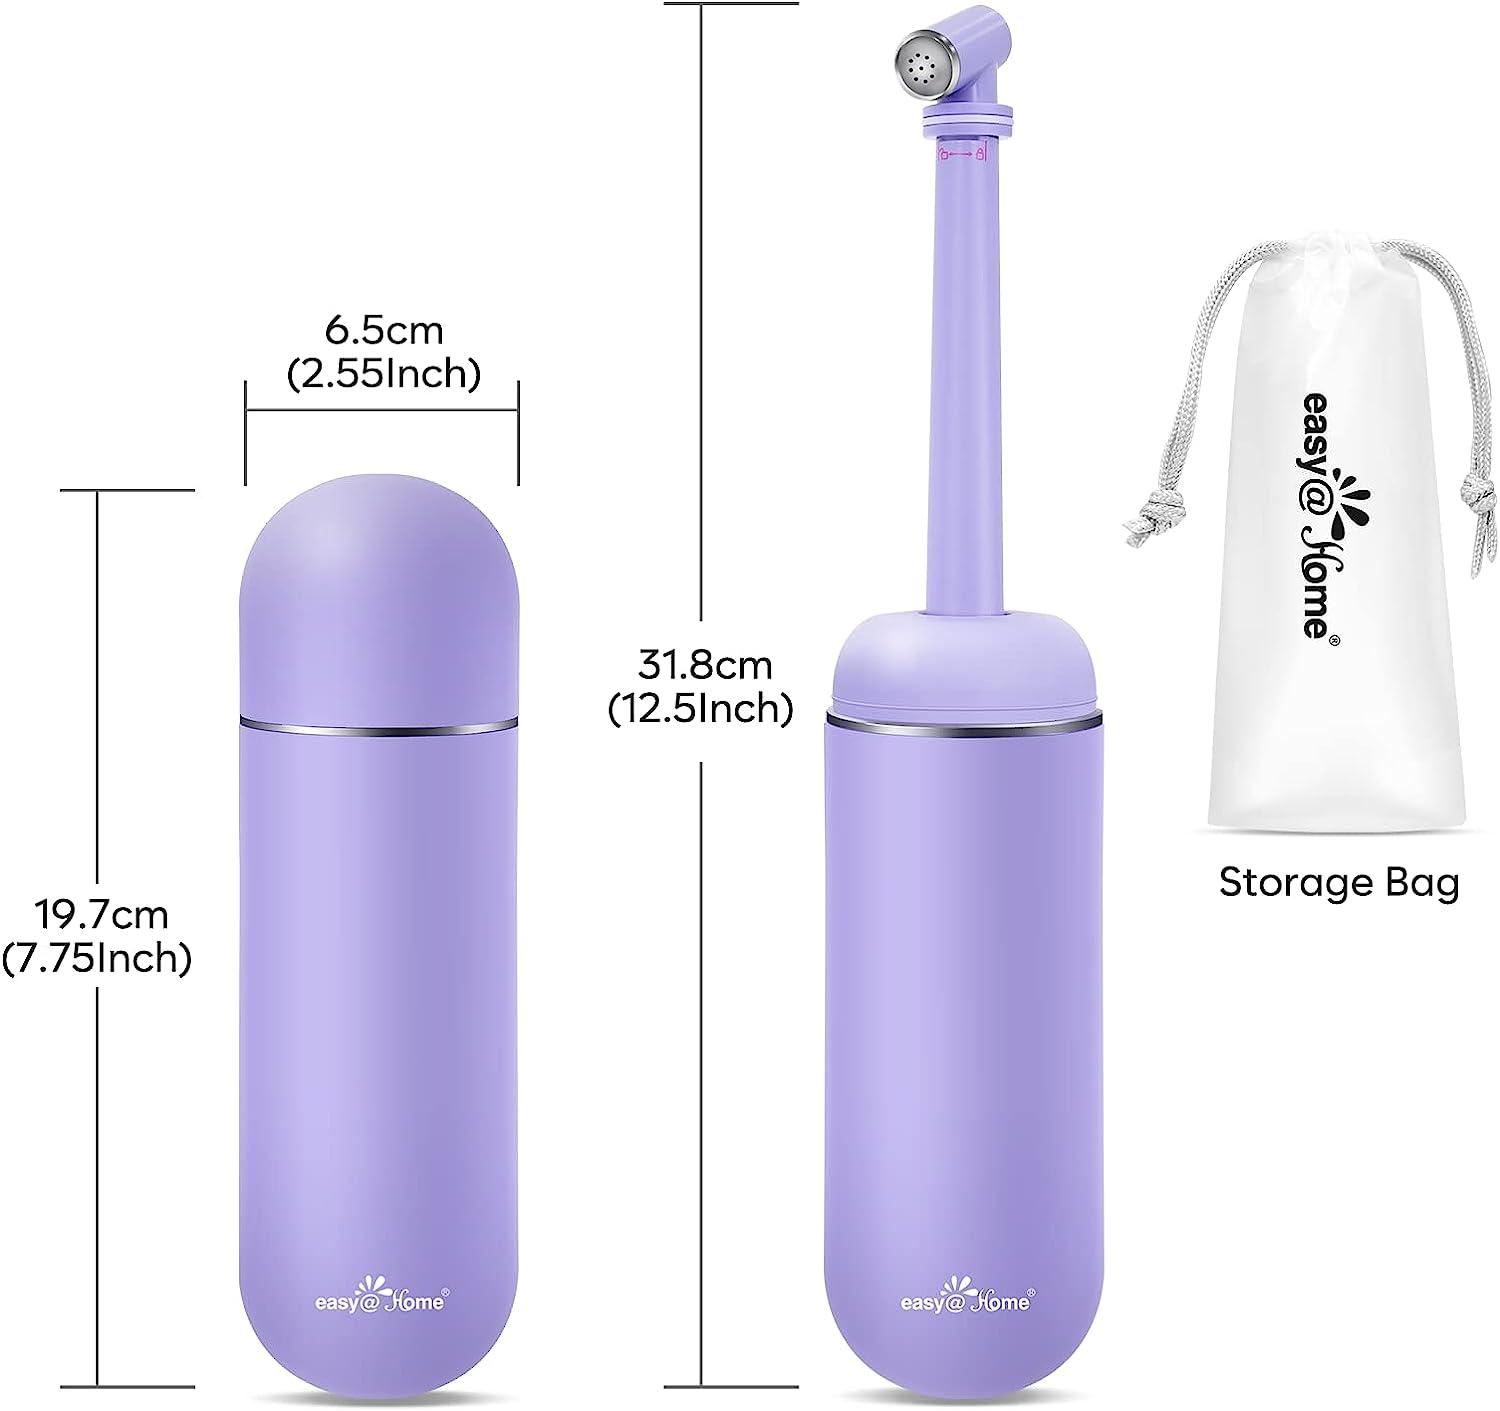 Portable Peri Bottle for Postpartum & Perineal Care: EasyHome Handheld  Bidet Perfect for Personal Hygiene Cleaning & Travel Friendly, 380ml  Leakproof & Convenient Design